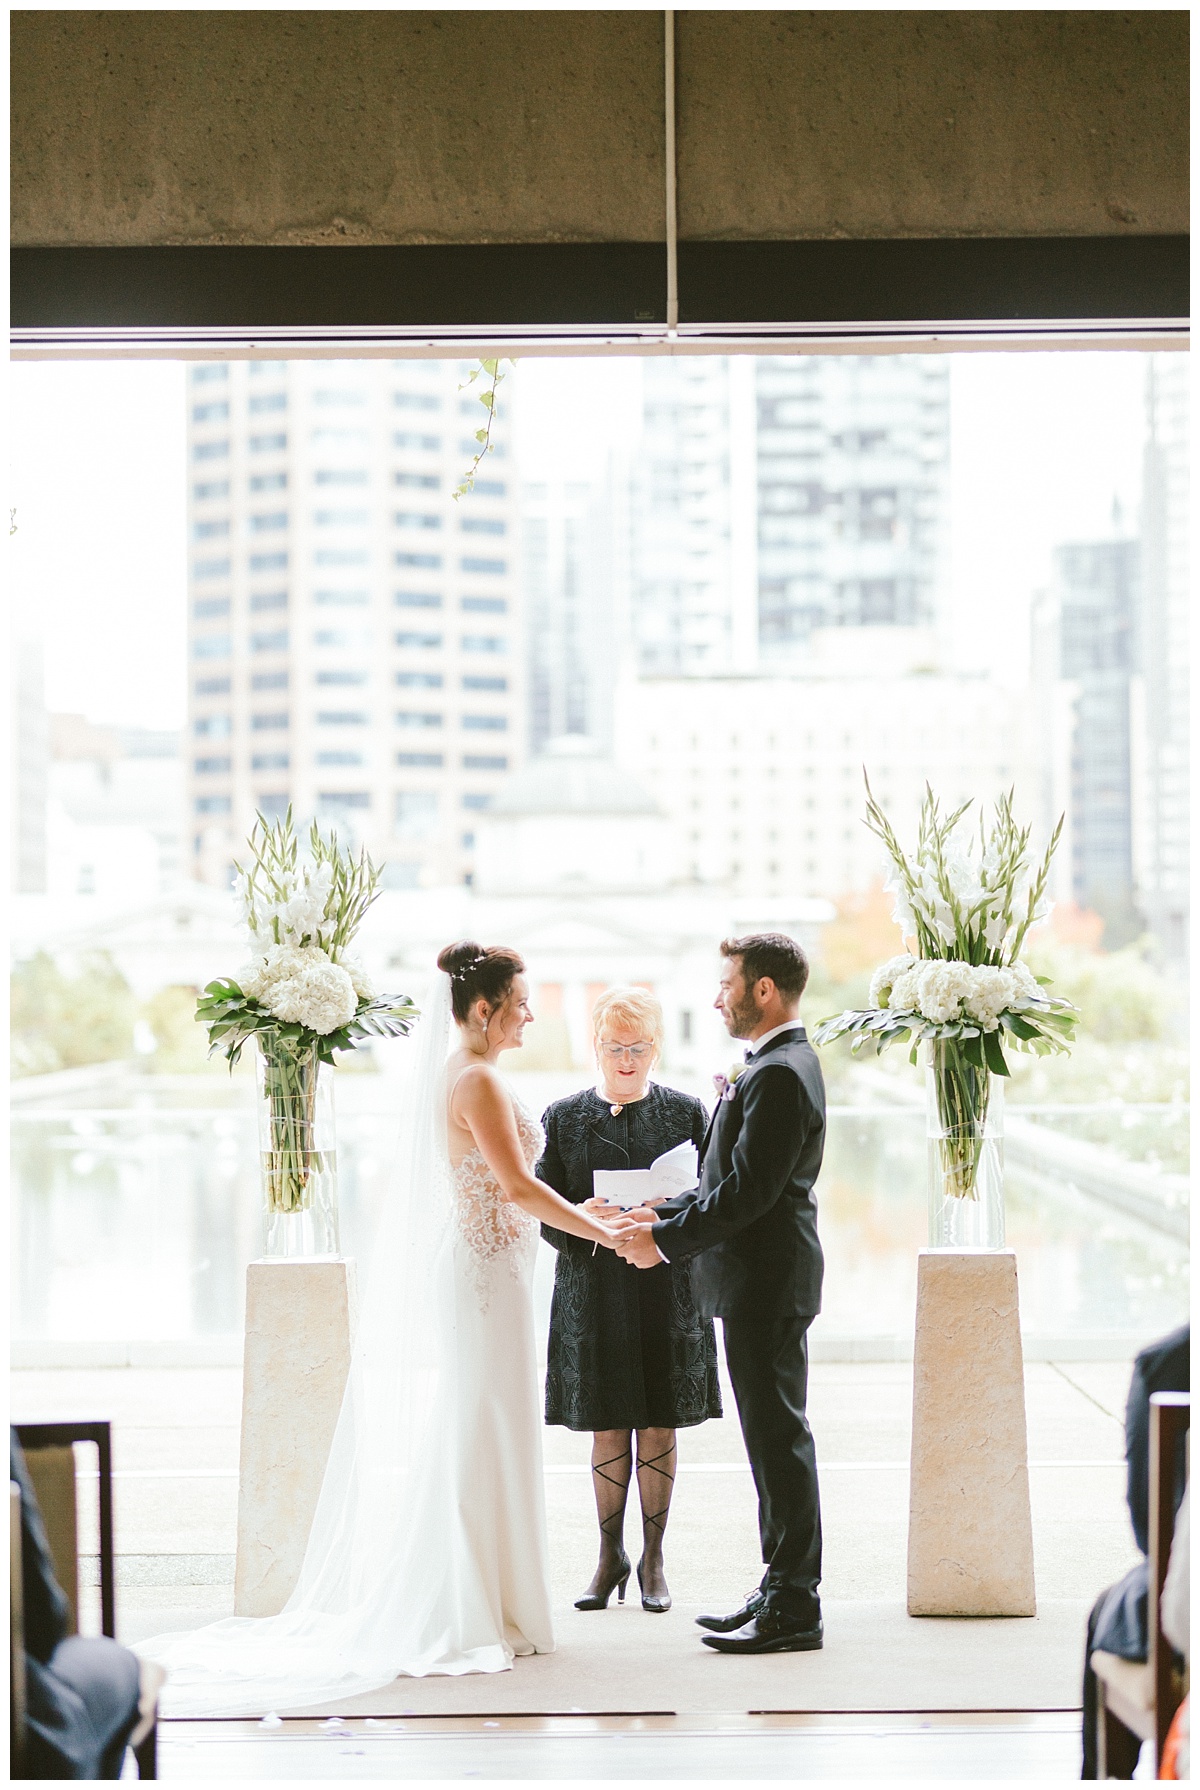  Wedding ceremony at Law Courts Inn, Vancouver 